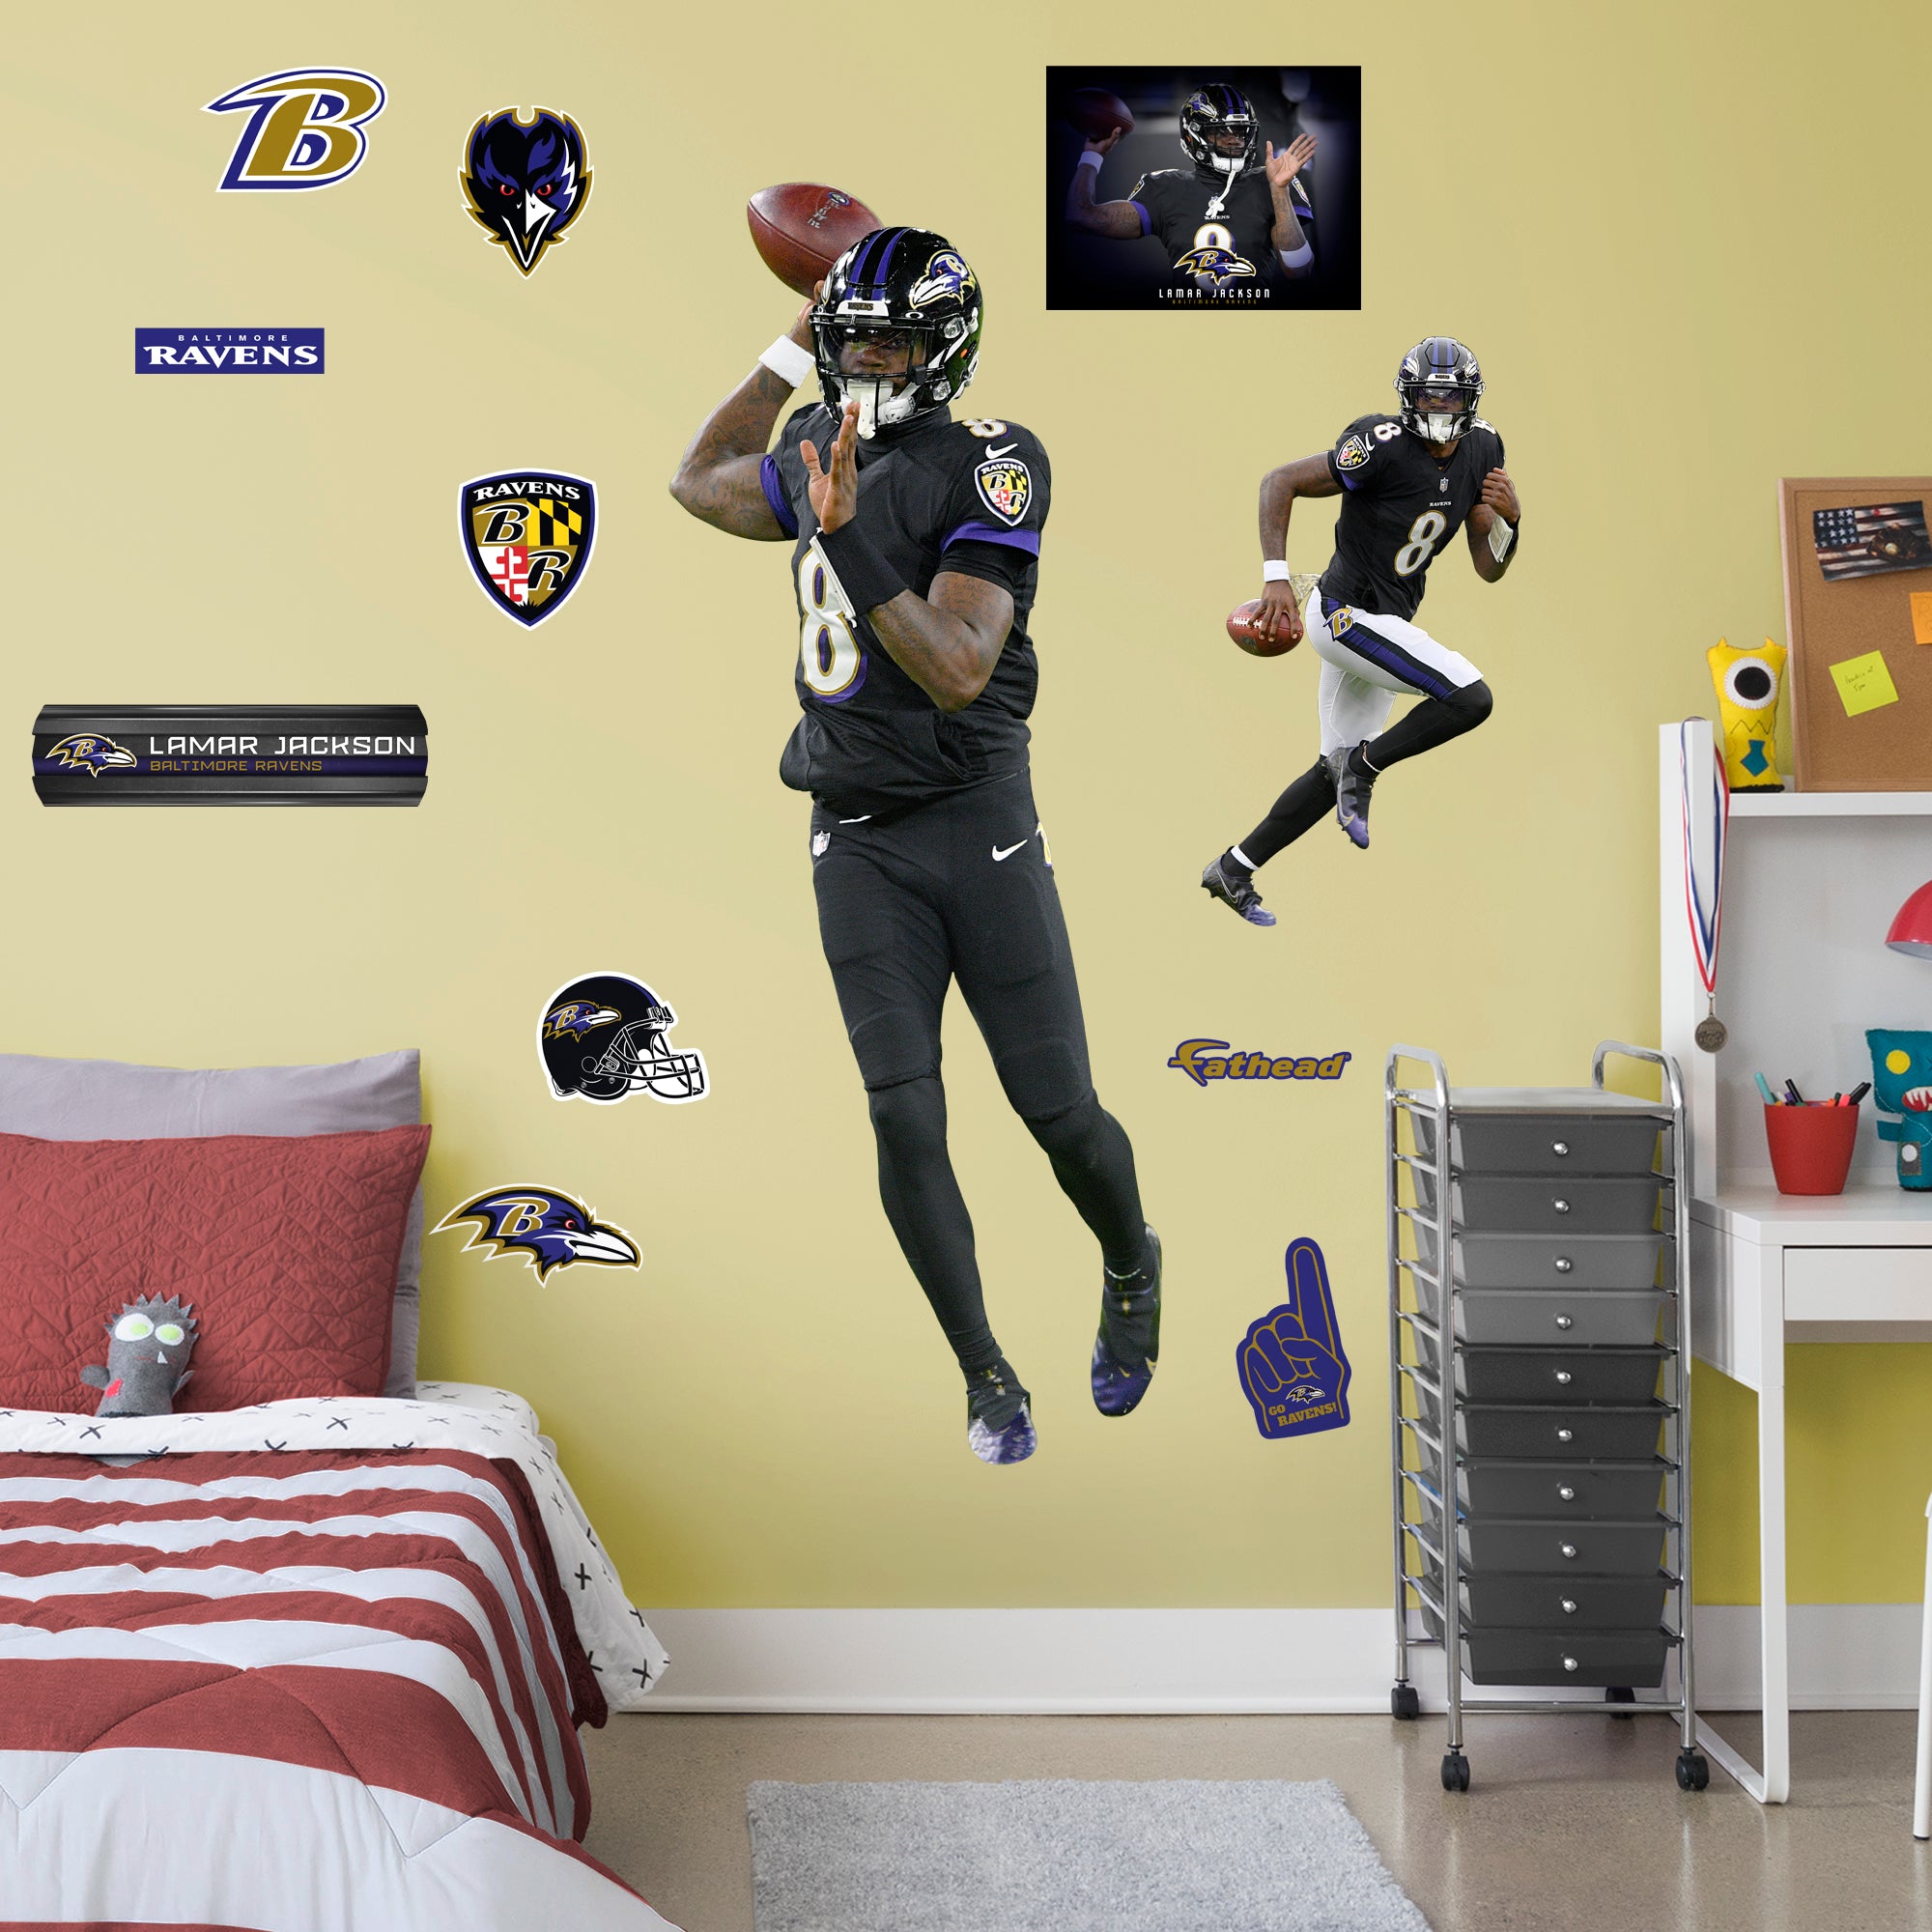 Lamar Jackson 2020 Black Jersey - Officially Licensed NFL Removable Wall Decal Life-Size Athlete + 10 Decals (30"W x 77"H) by Fa